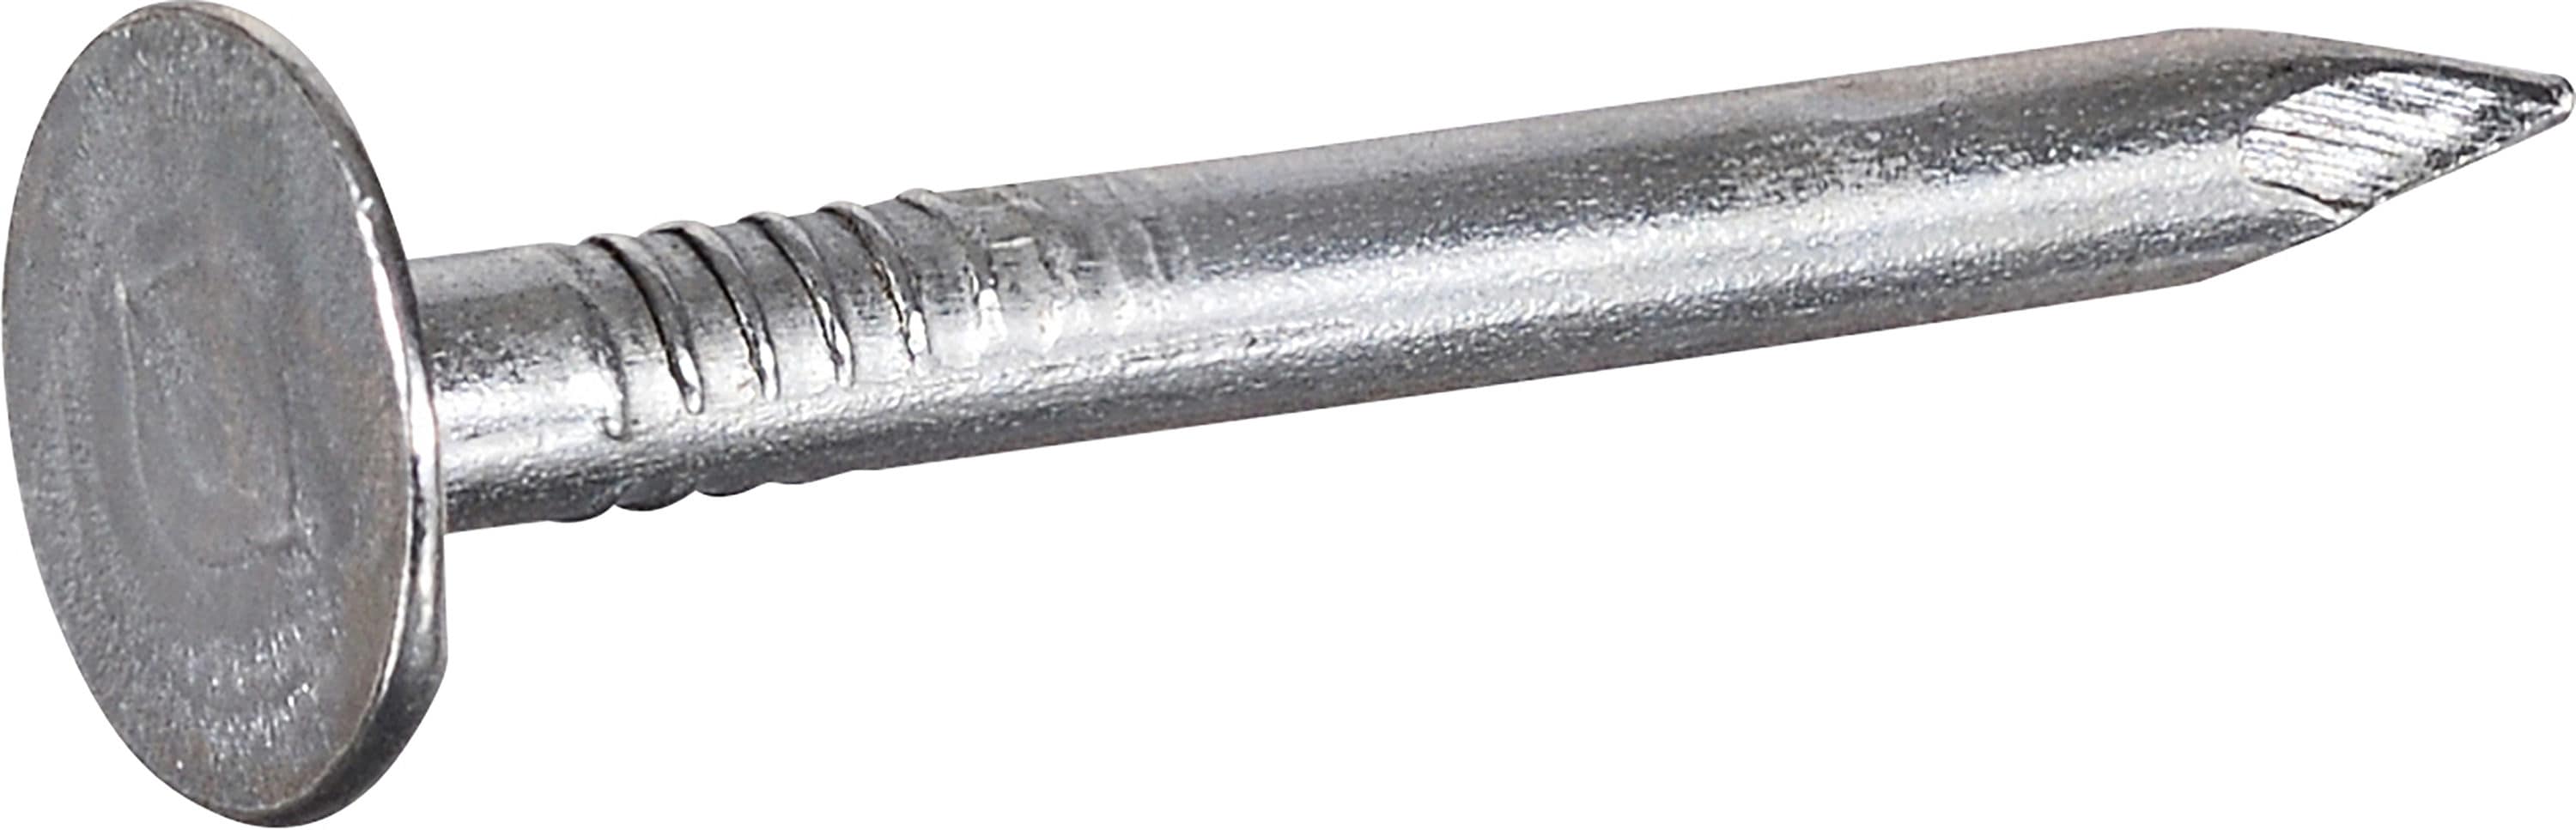 Grip-Rite 1-1/4-in 15-Gauge Stainless Steel Trim Nails in the Brads &  Finish Nails department at Lowes.com